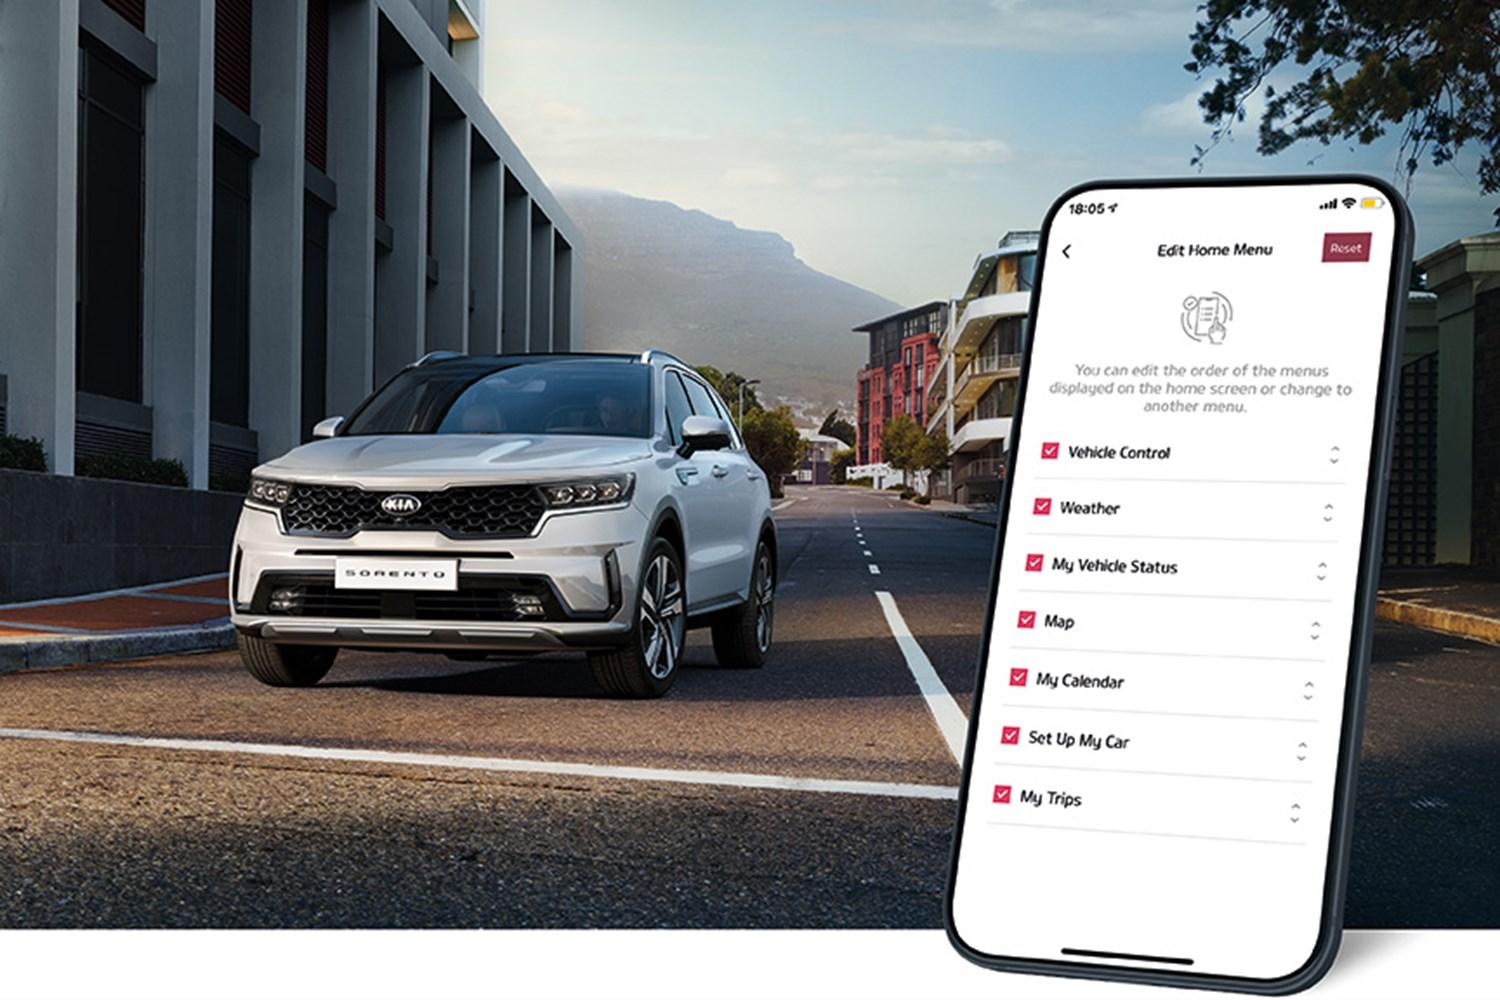 KIA'S UVO CONNECT APP ENHANCED WITH IMPROVED USER INTERFACE AND UPDATED